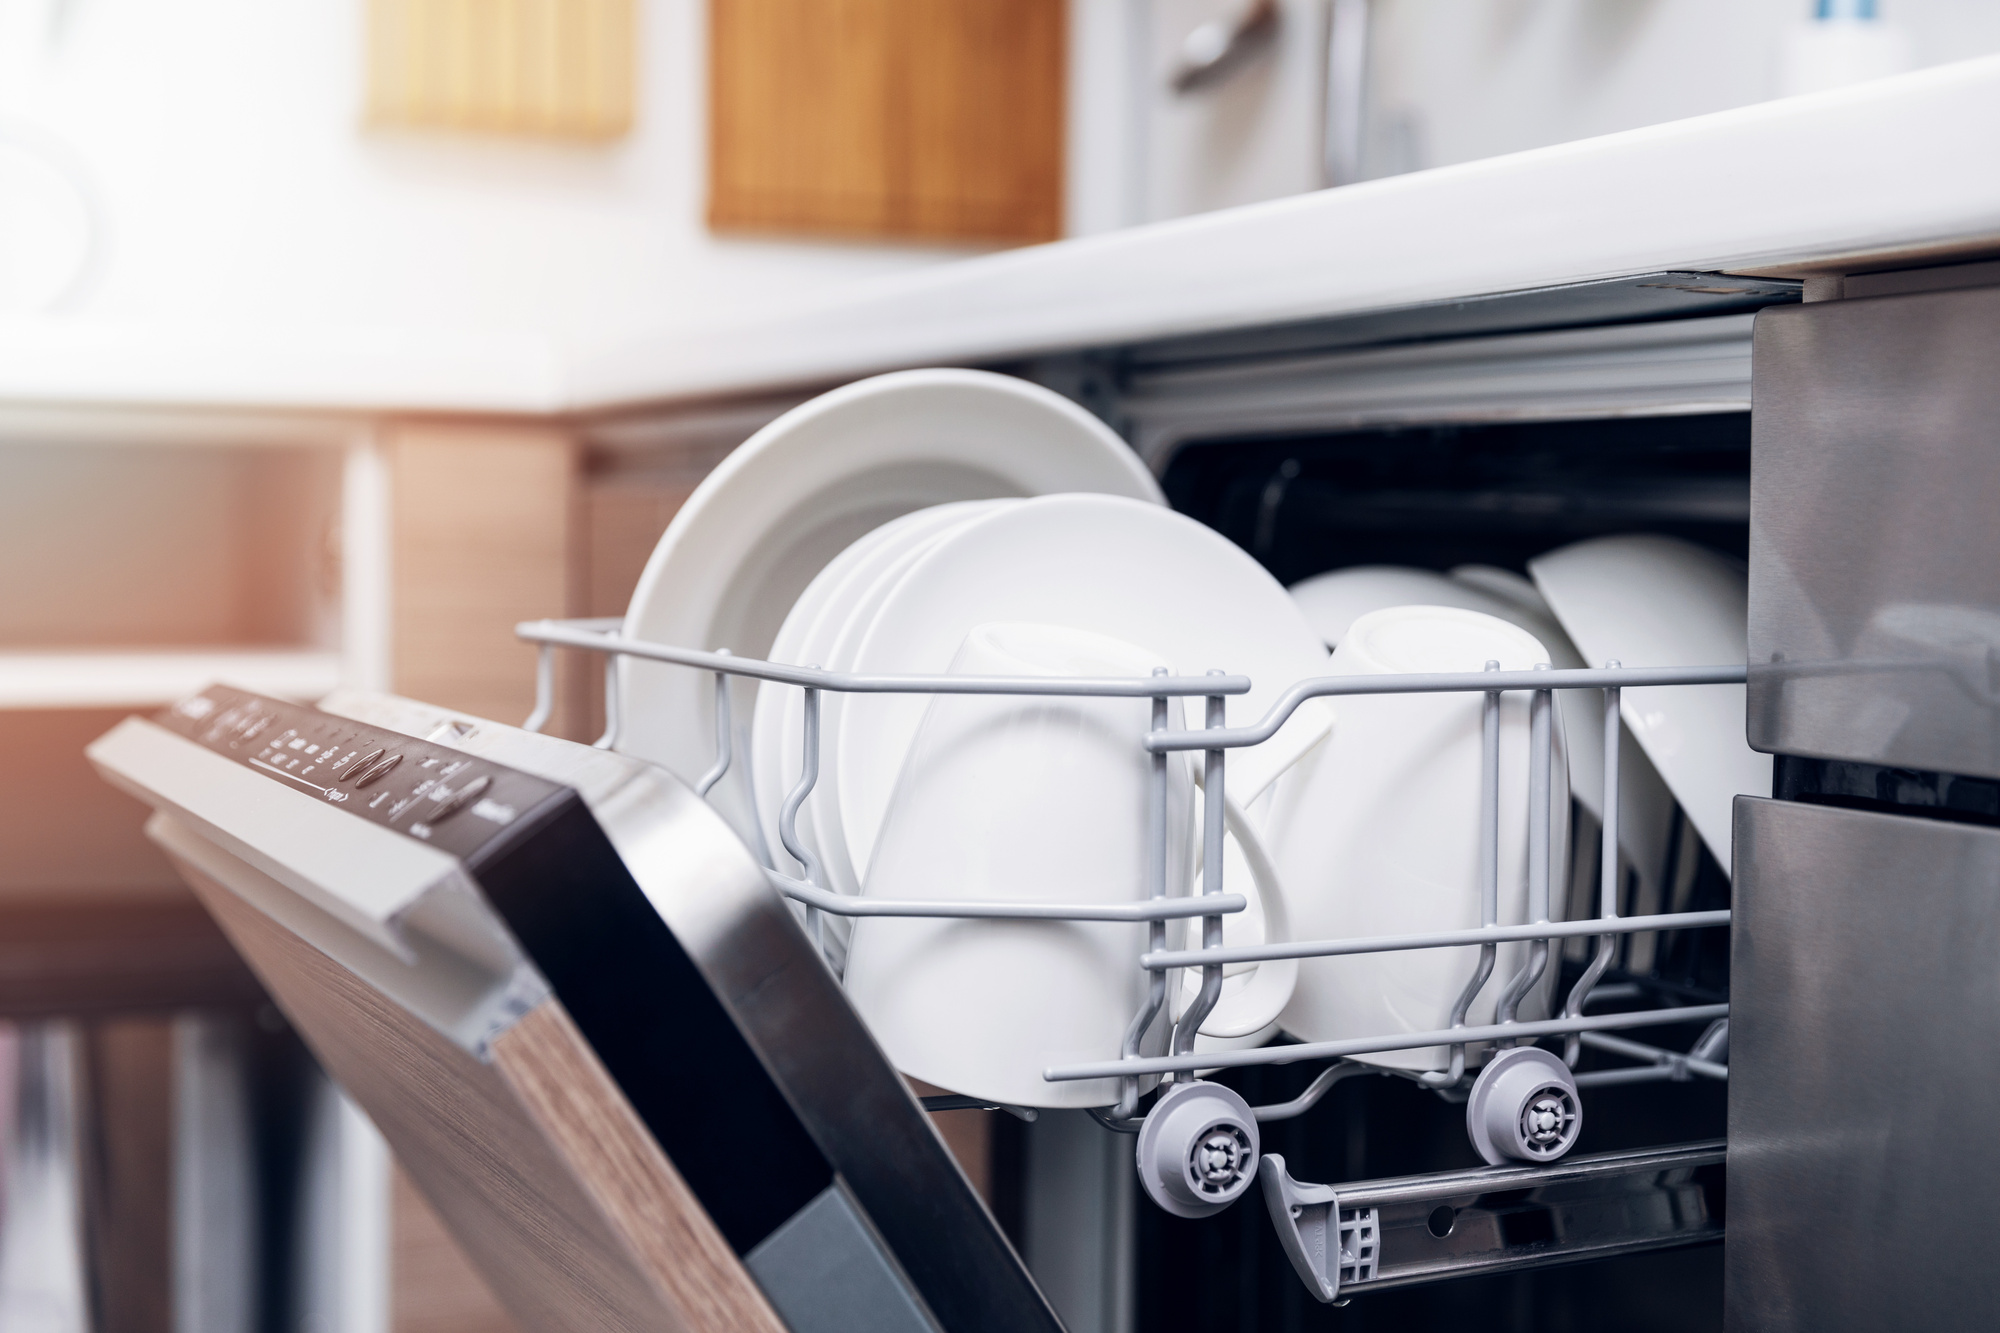 What is Dishwasher Safe and Can Be Cleaned Automatically?